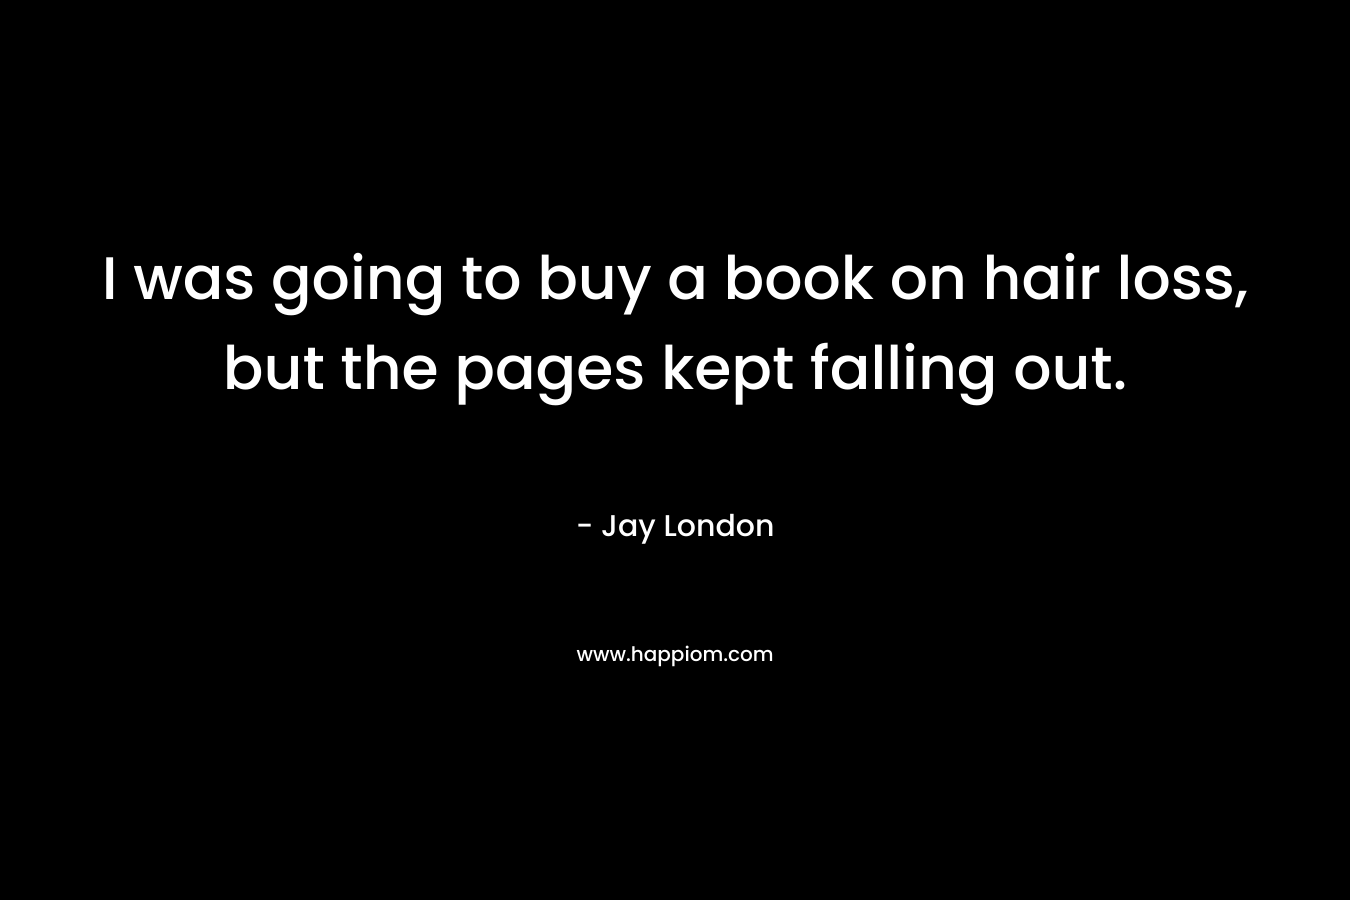 I was going to buy a book on hair loss, but the pages kept falling out.